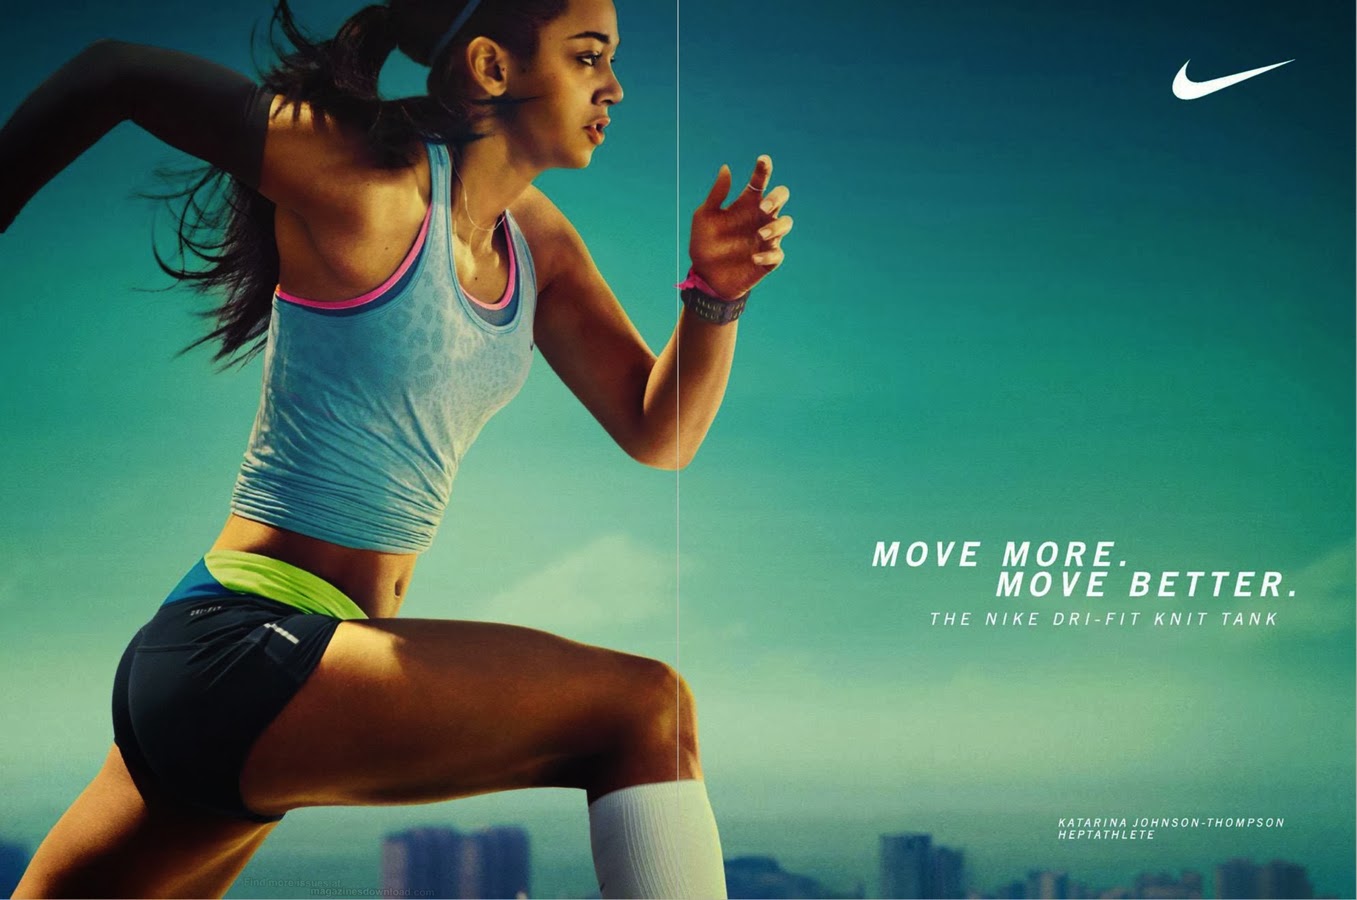 The Essentialist - Fashion Advertising Updated Daily: Nike Ad Campaign Spring/Summer 2013